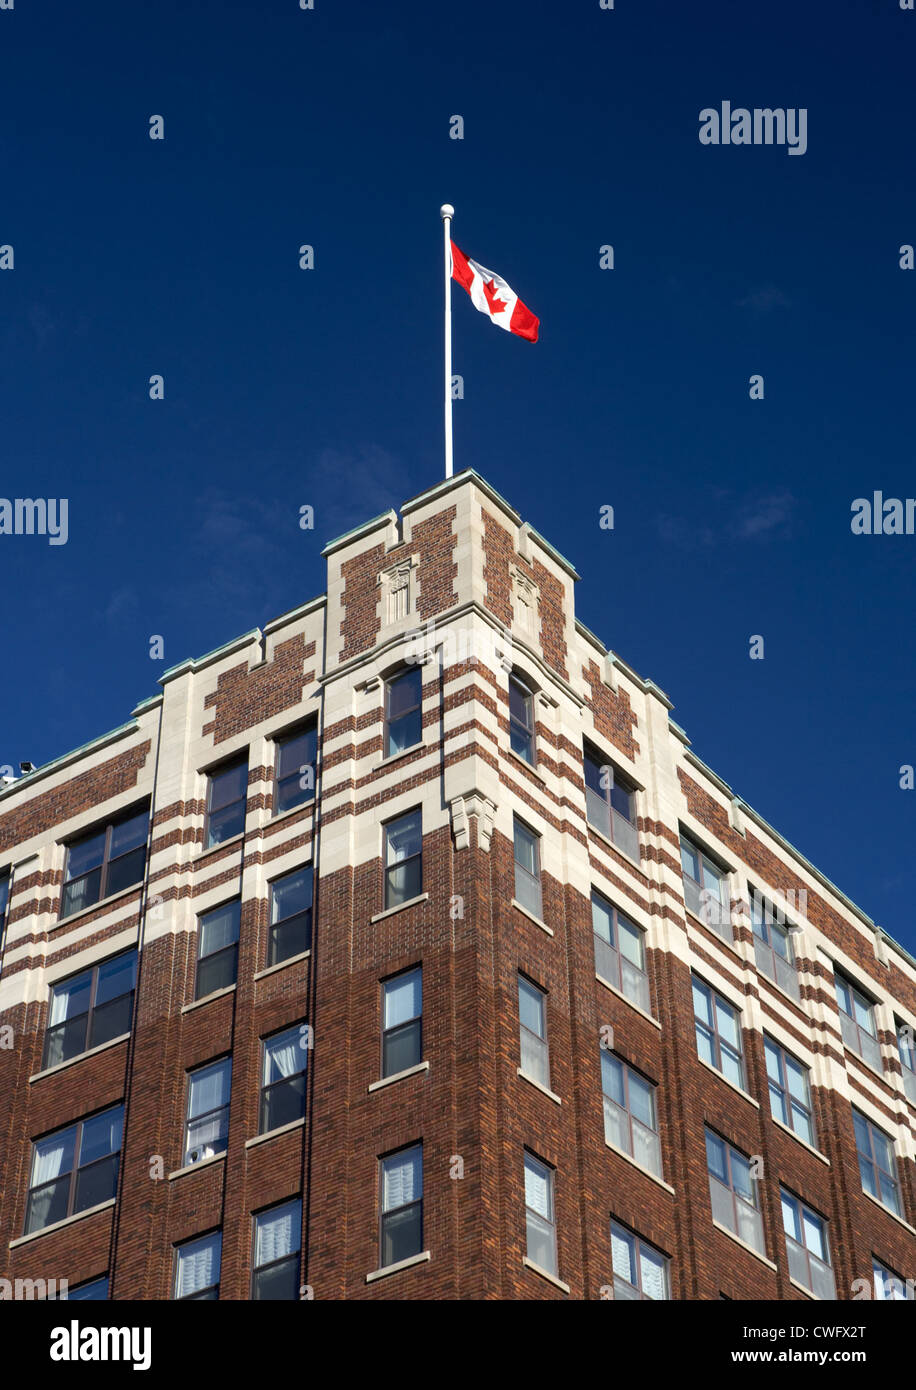 Ottawa - government building with the Canadian flag Stock Photo